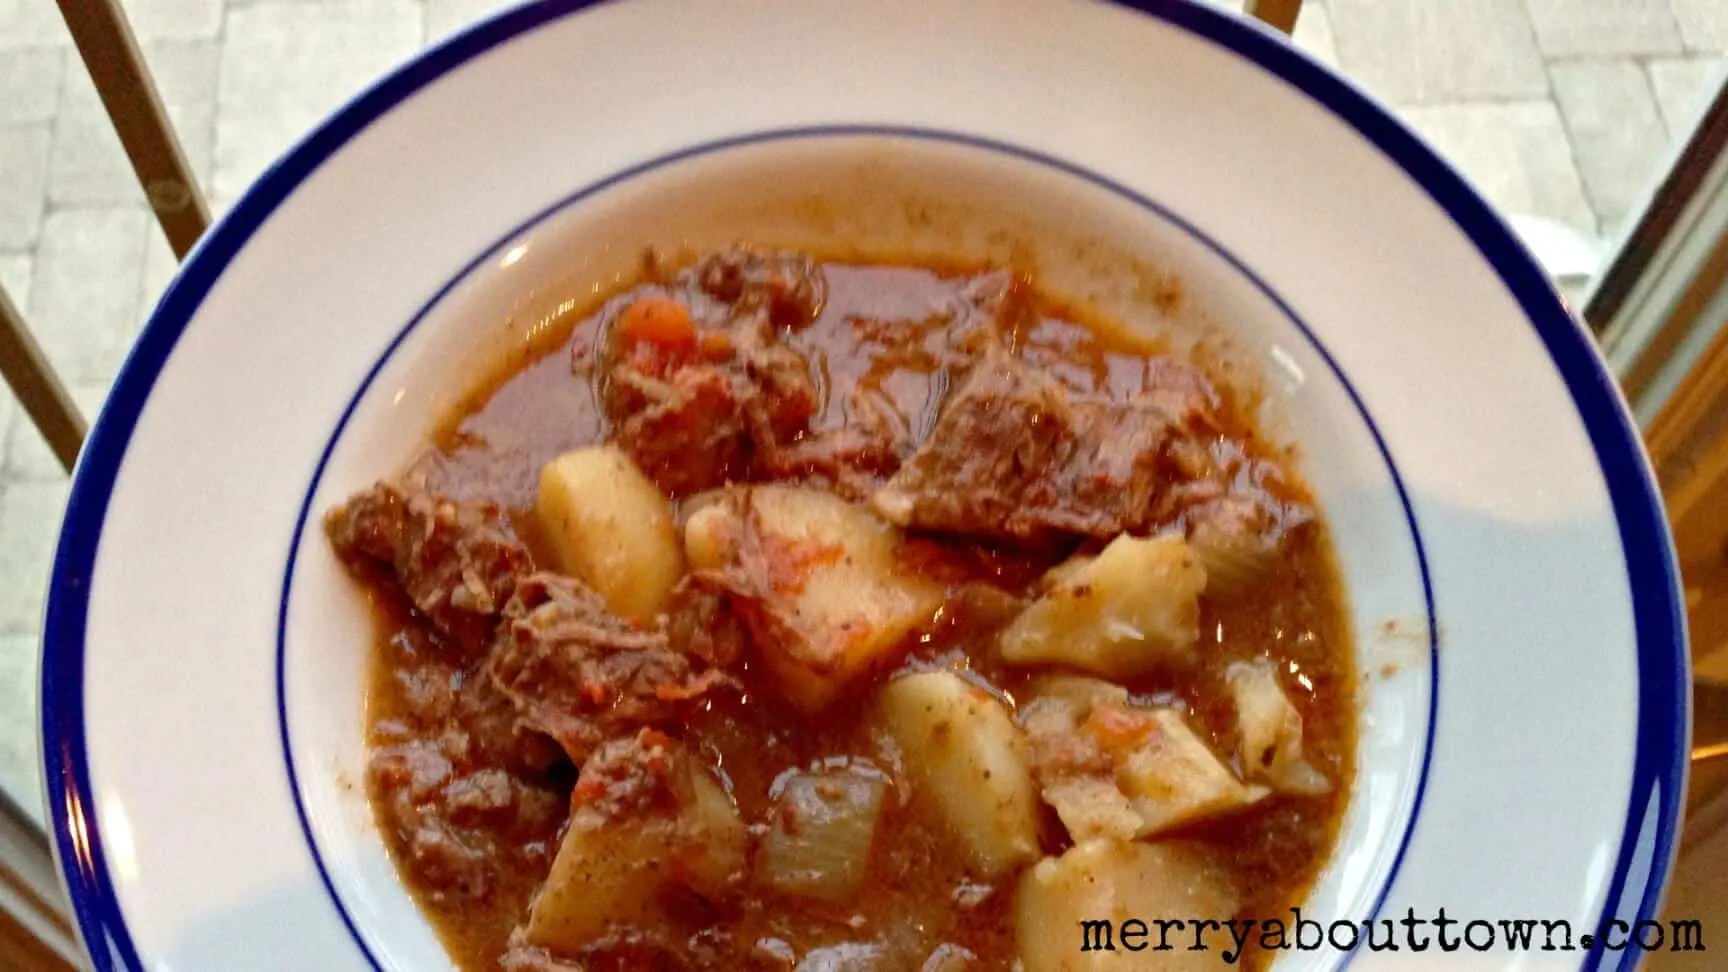 Crockpot Beef Stew - Merry About Town